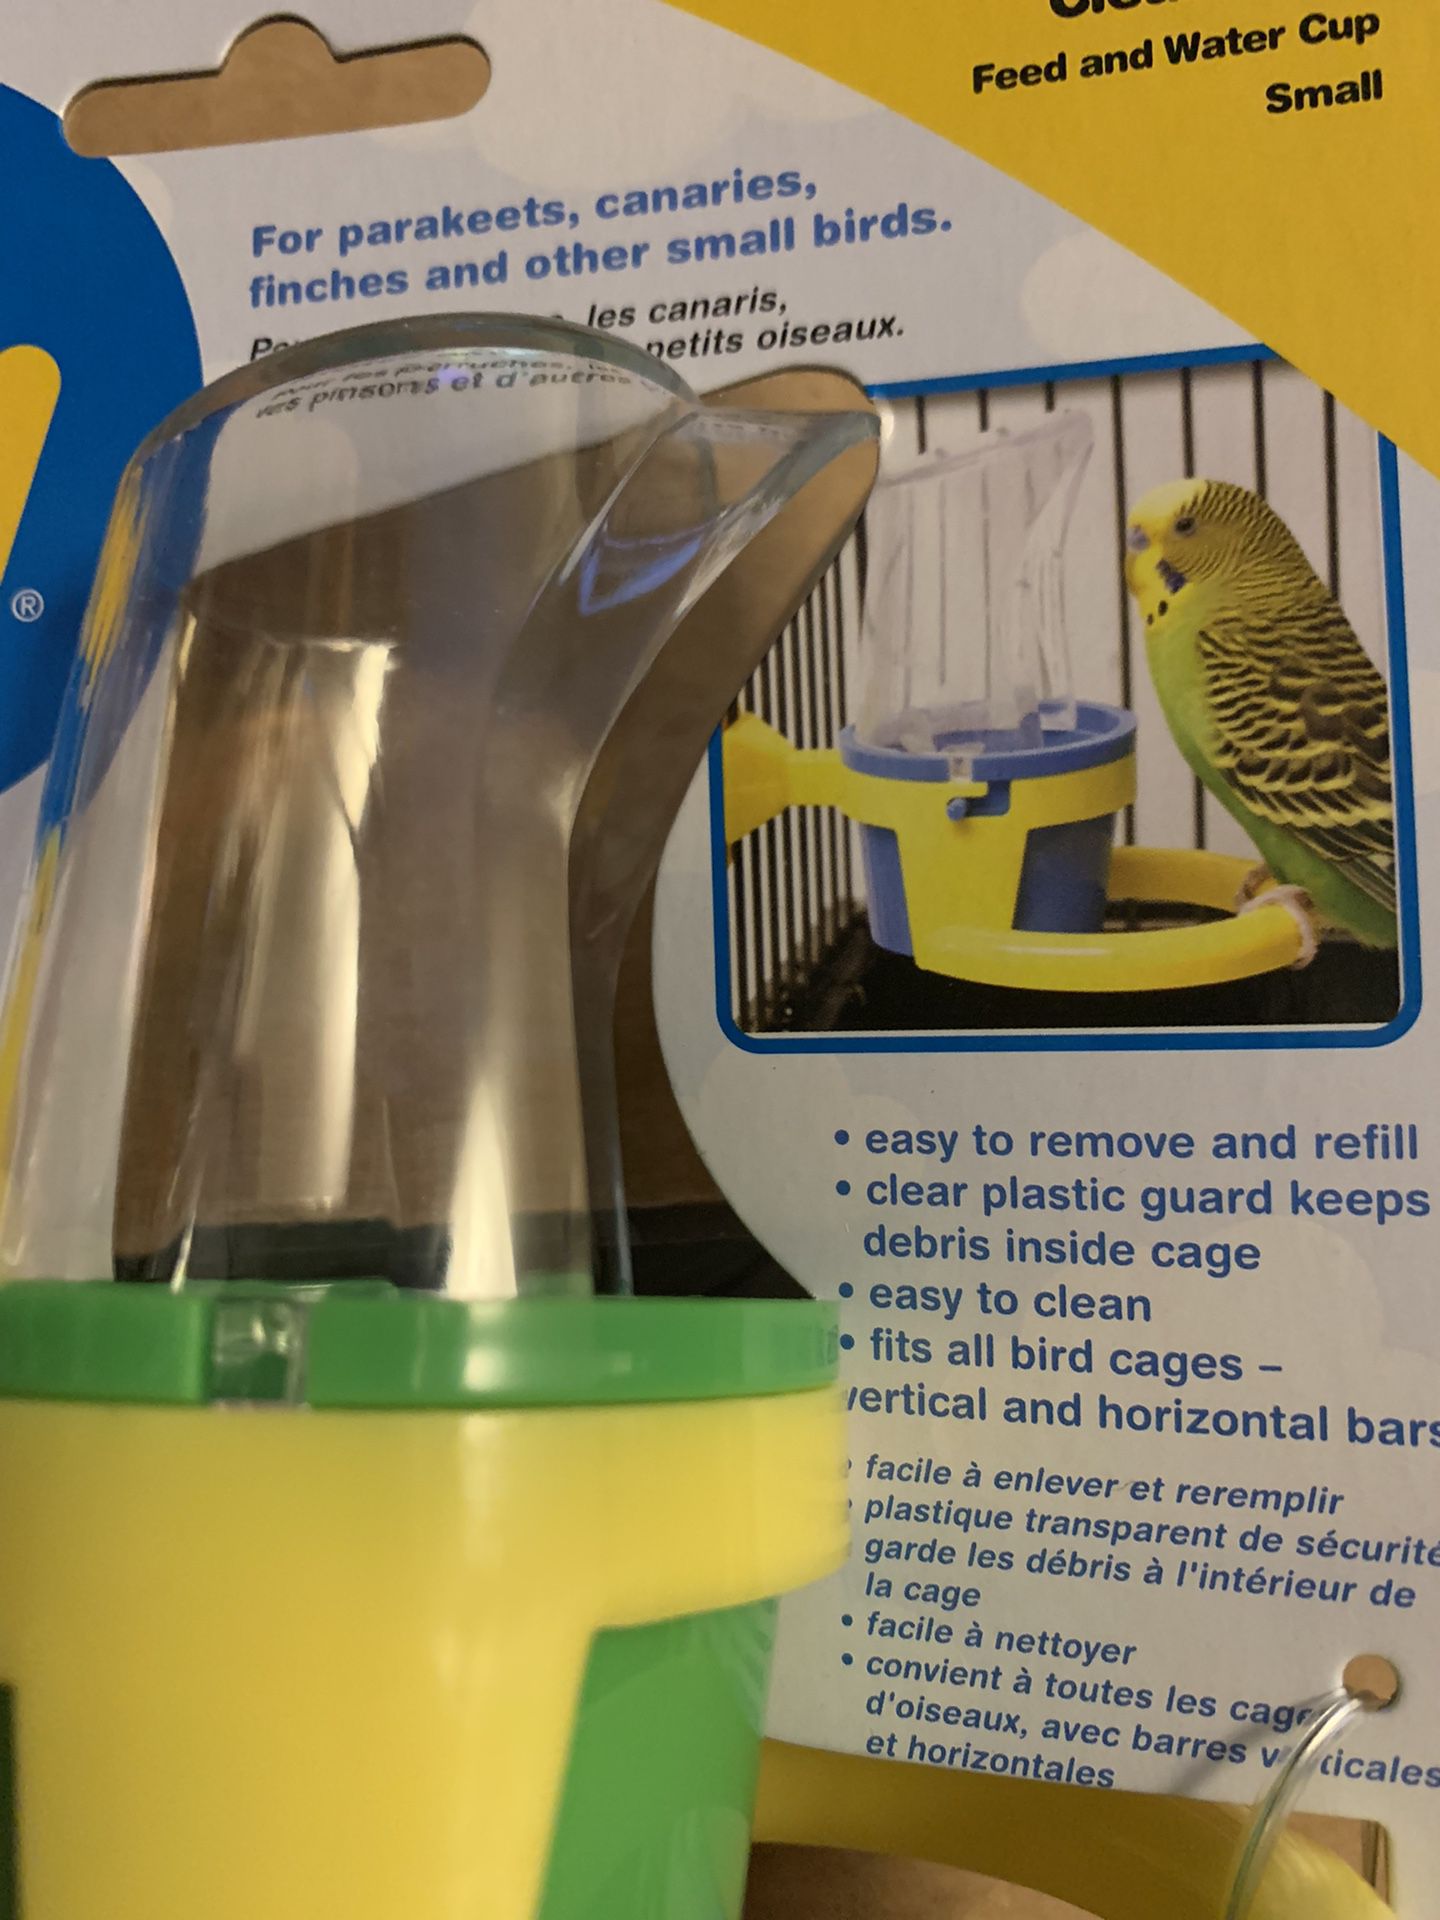 Small Bird Feeder For Cage